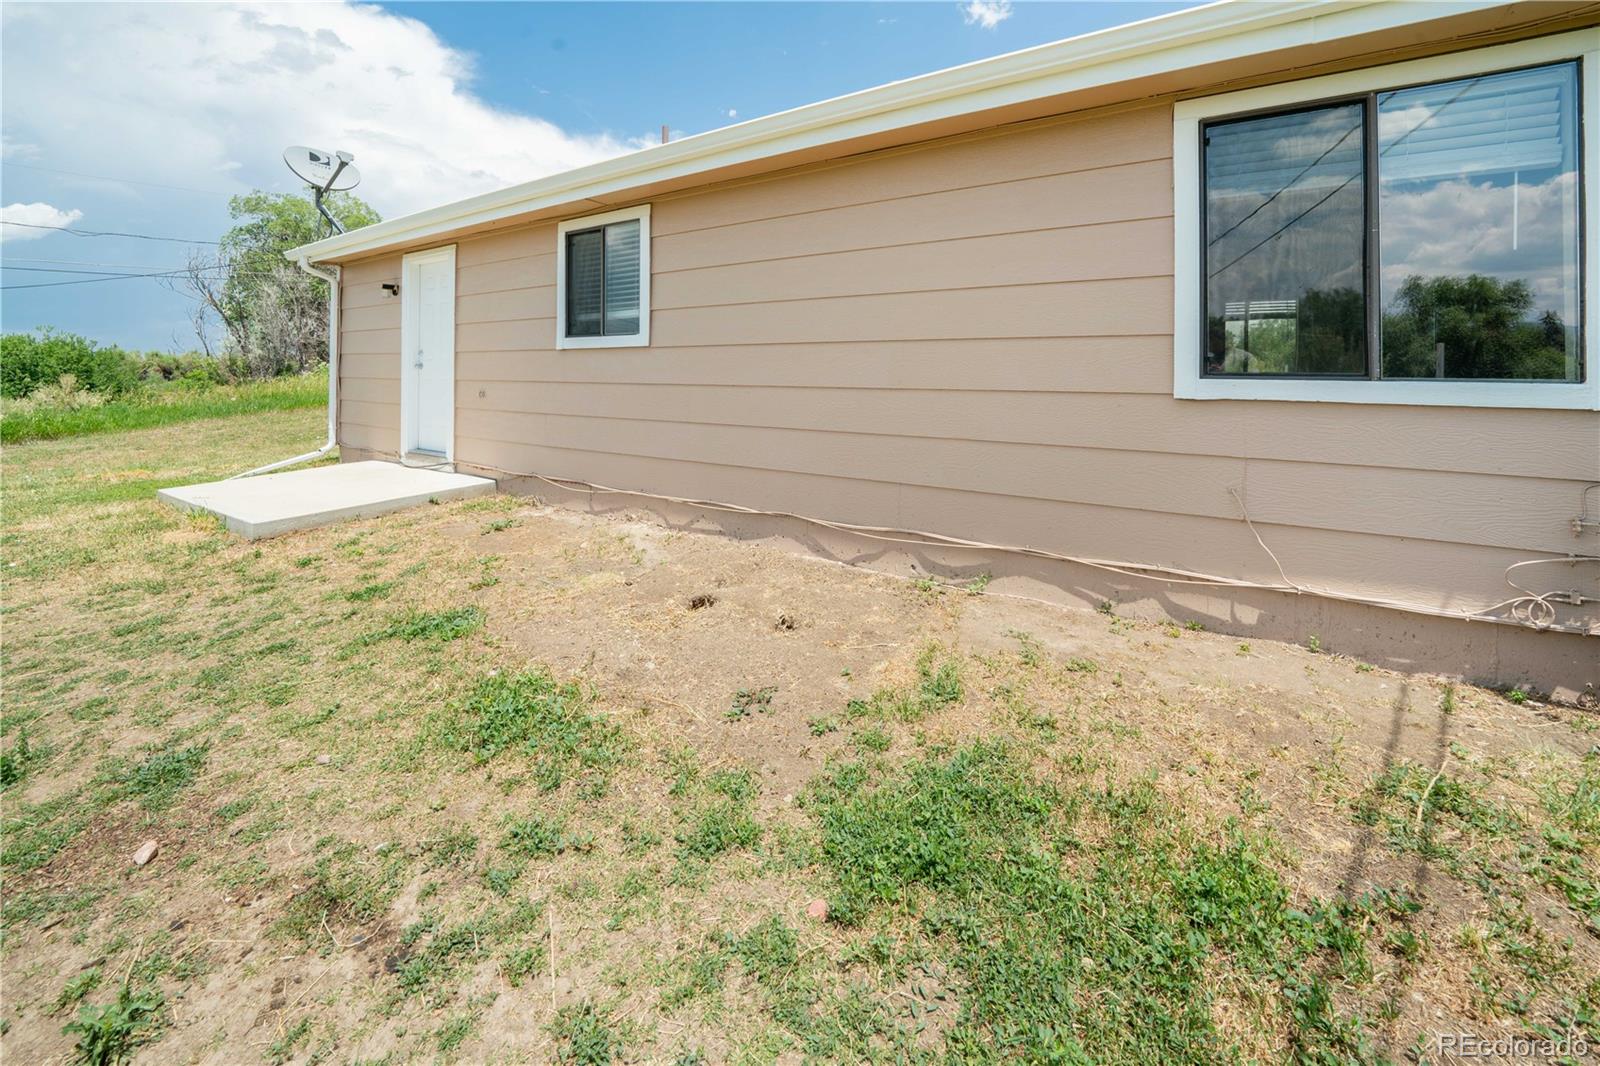 1475 Youngfield, Golden, CO